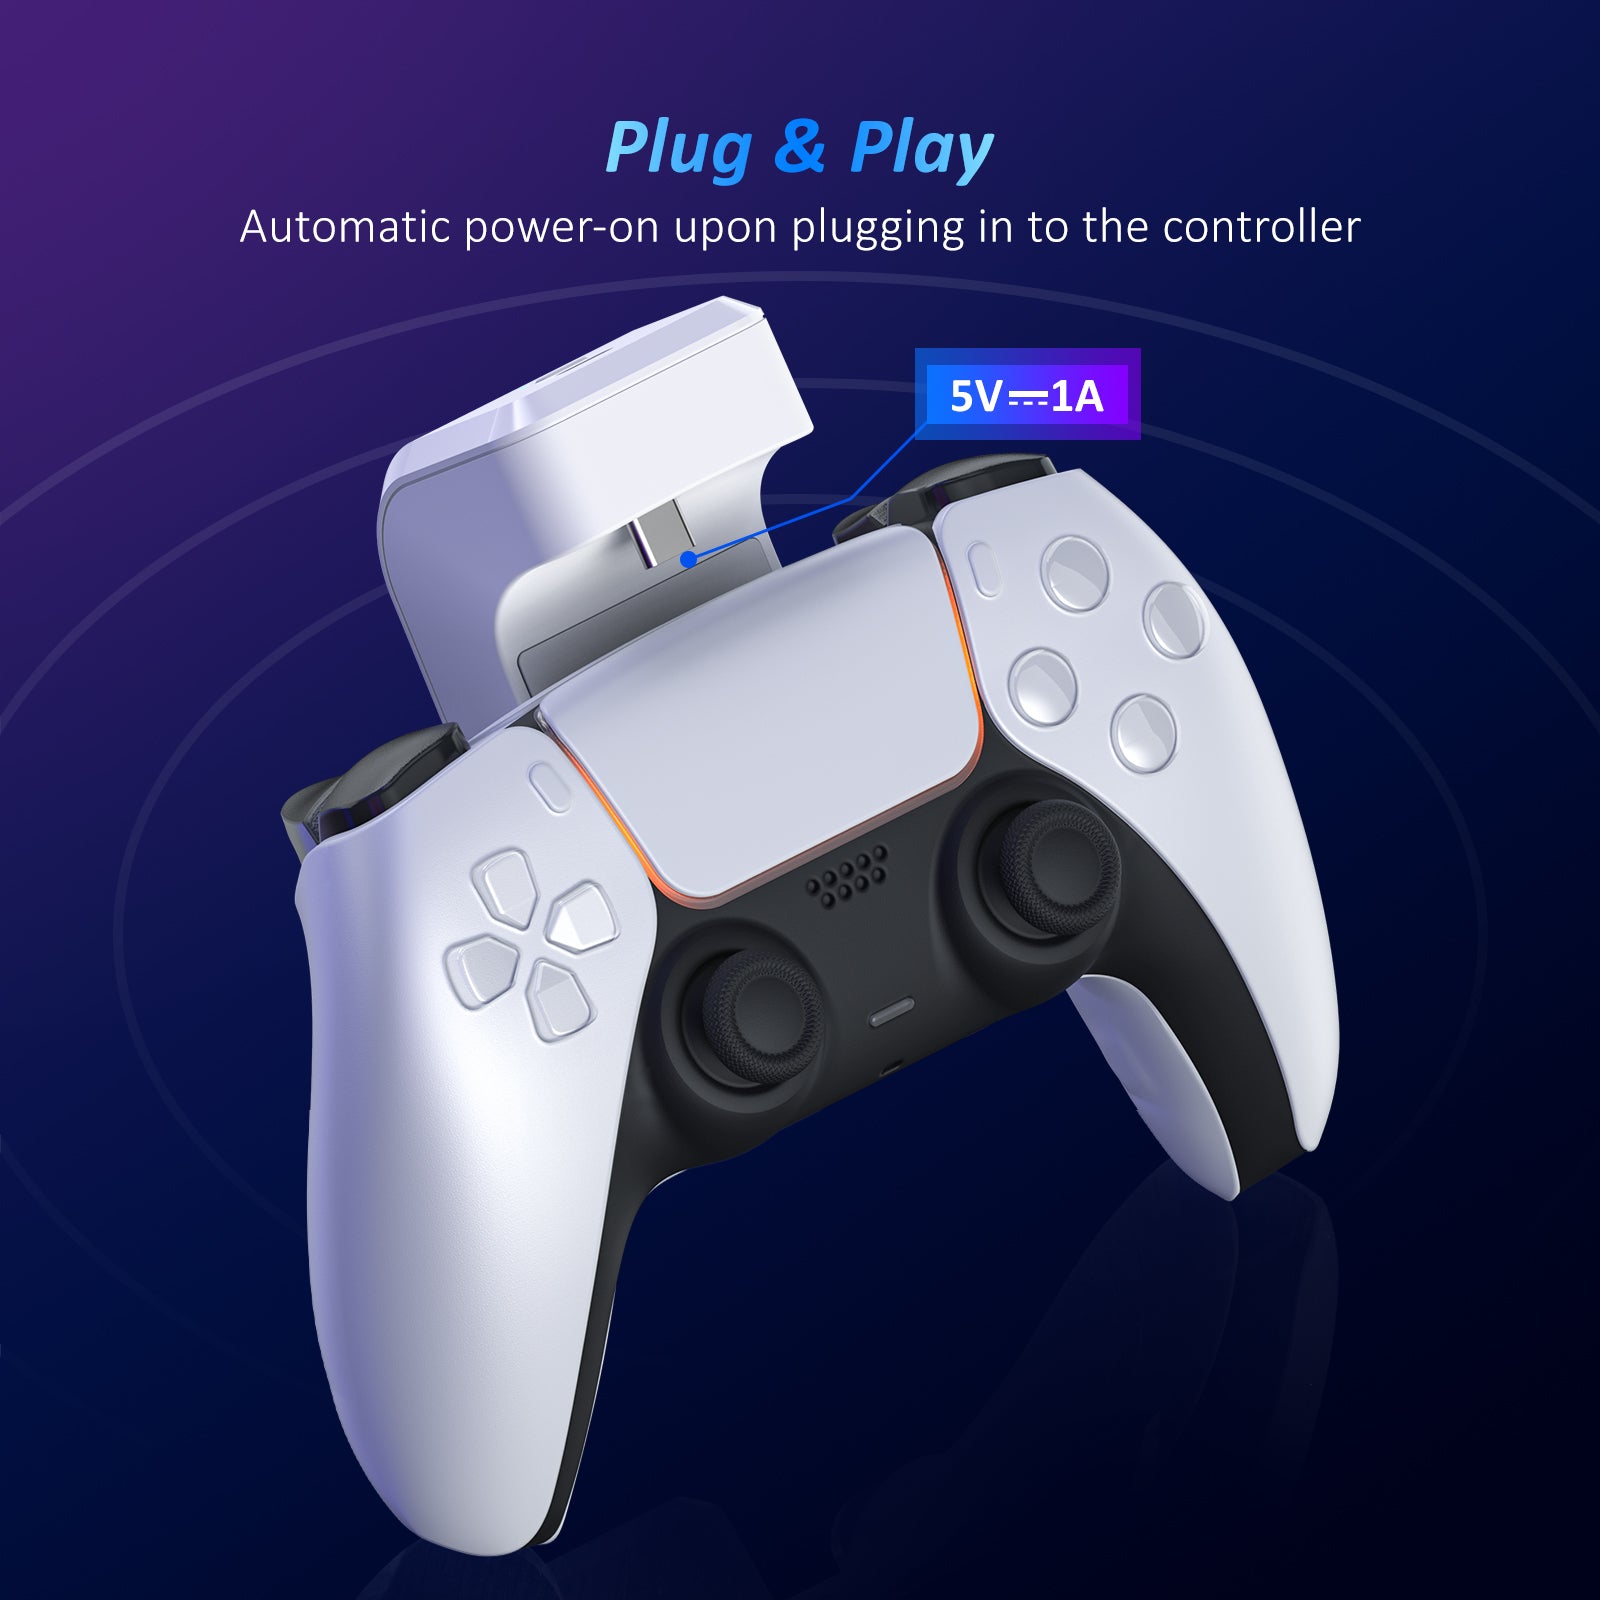 Simply plug the power bank into the controller to use.